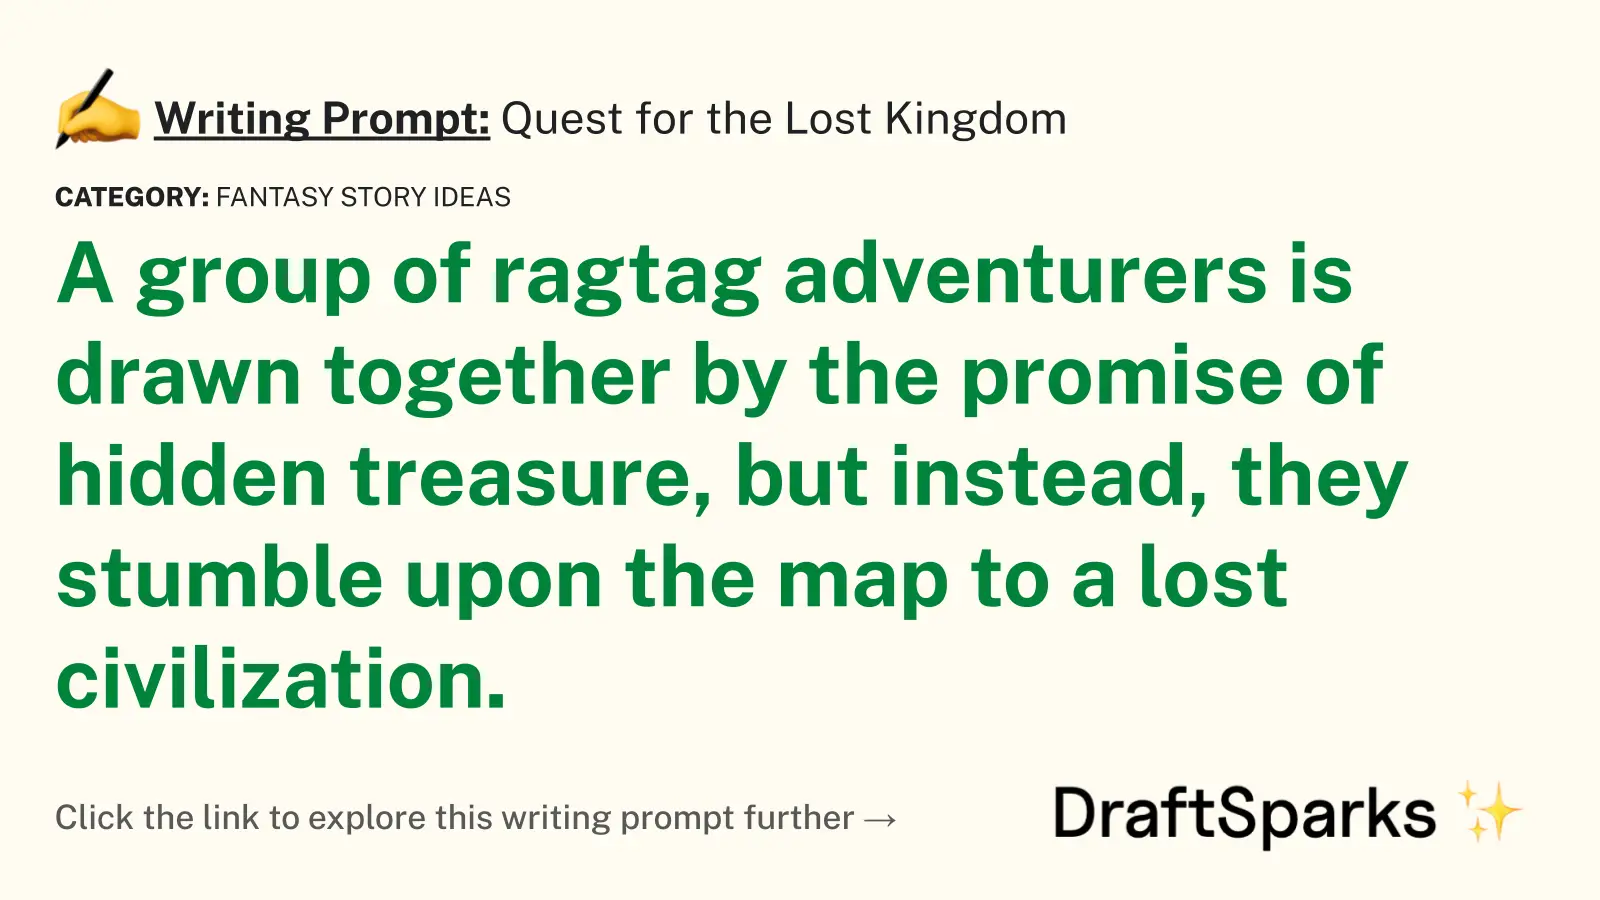 Quest for the Lost Kingdom